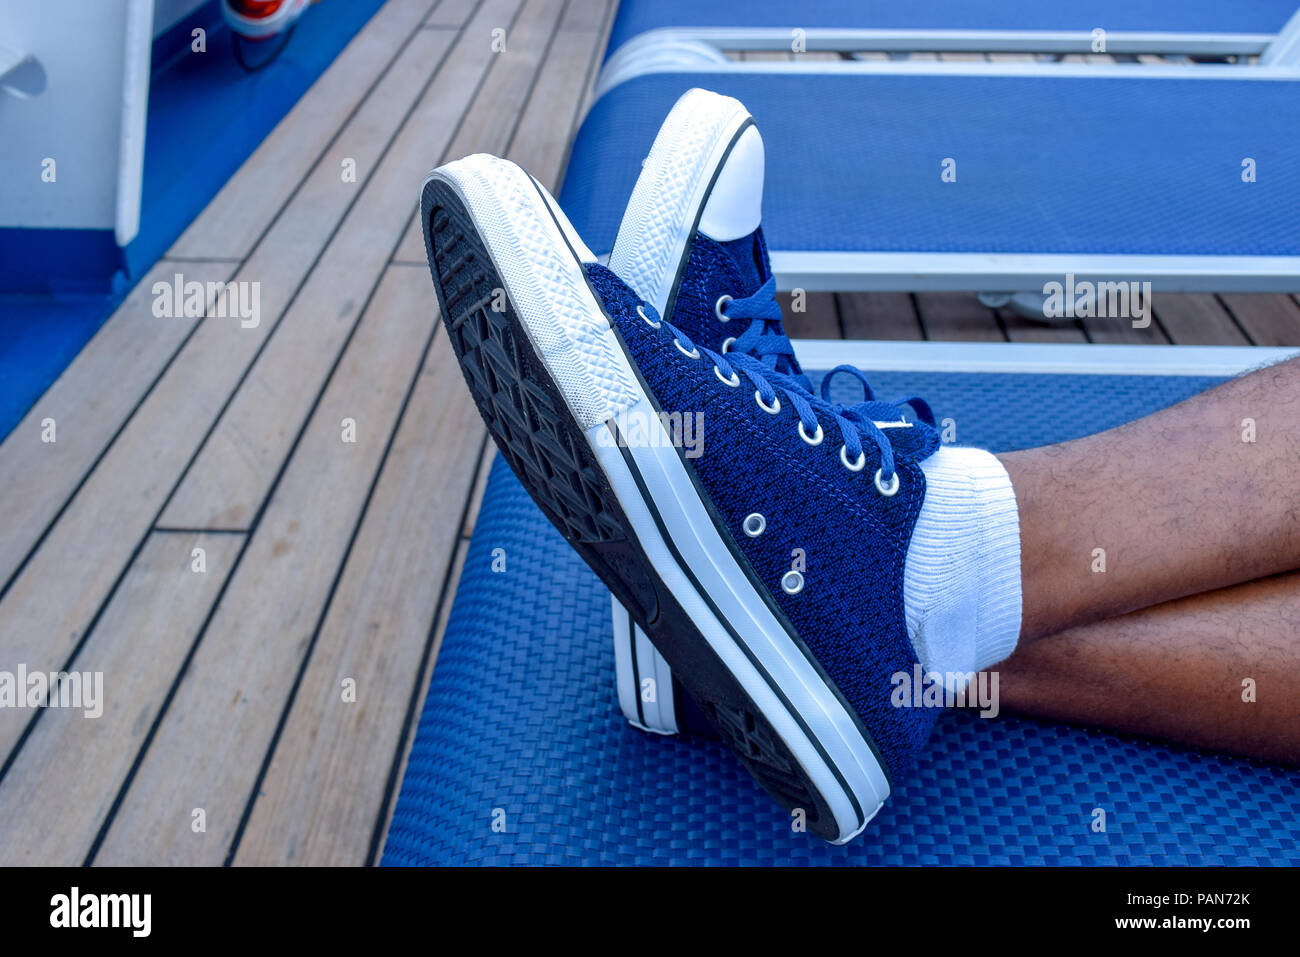 Relaxation. Male feet crossed, wearing blue sneakers, in lounge chair Stock  Photo - Alamy